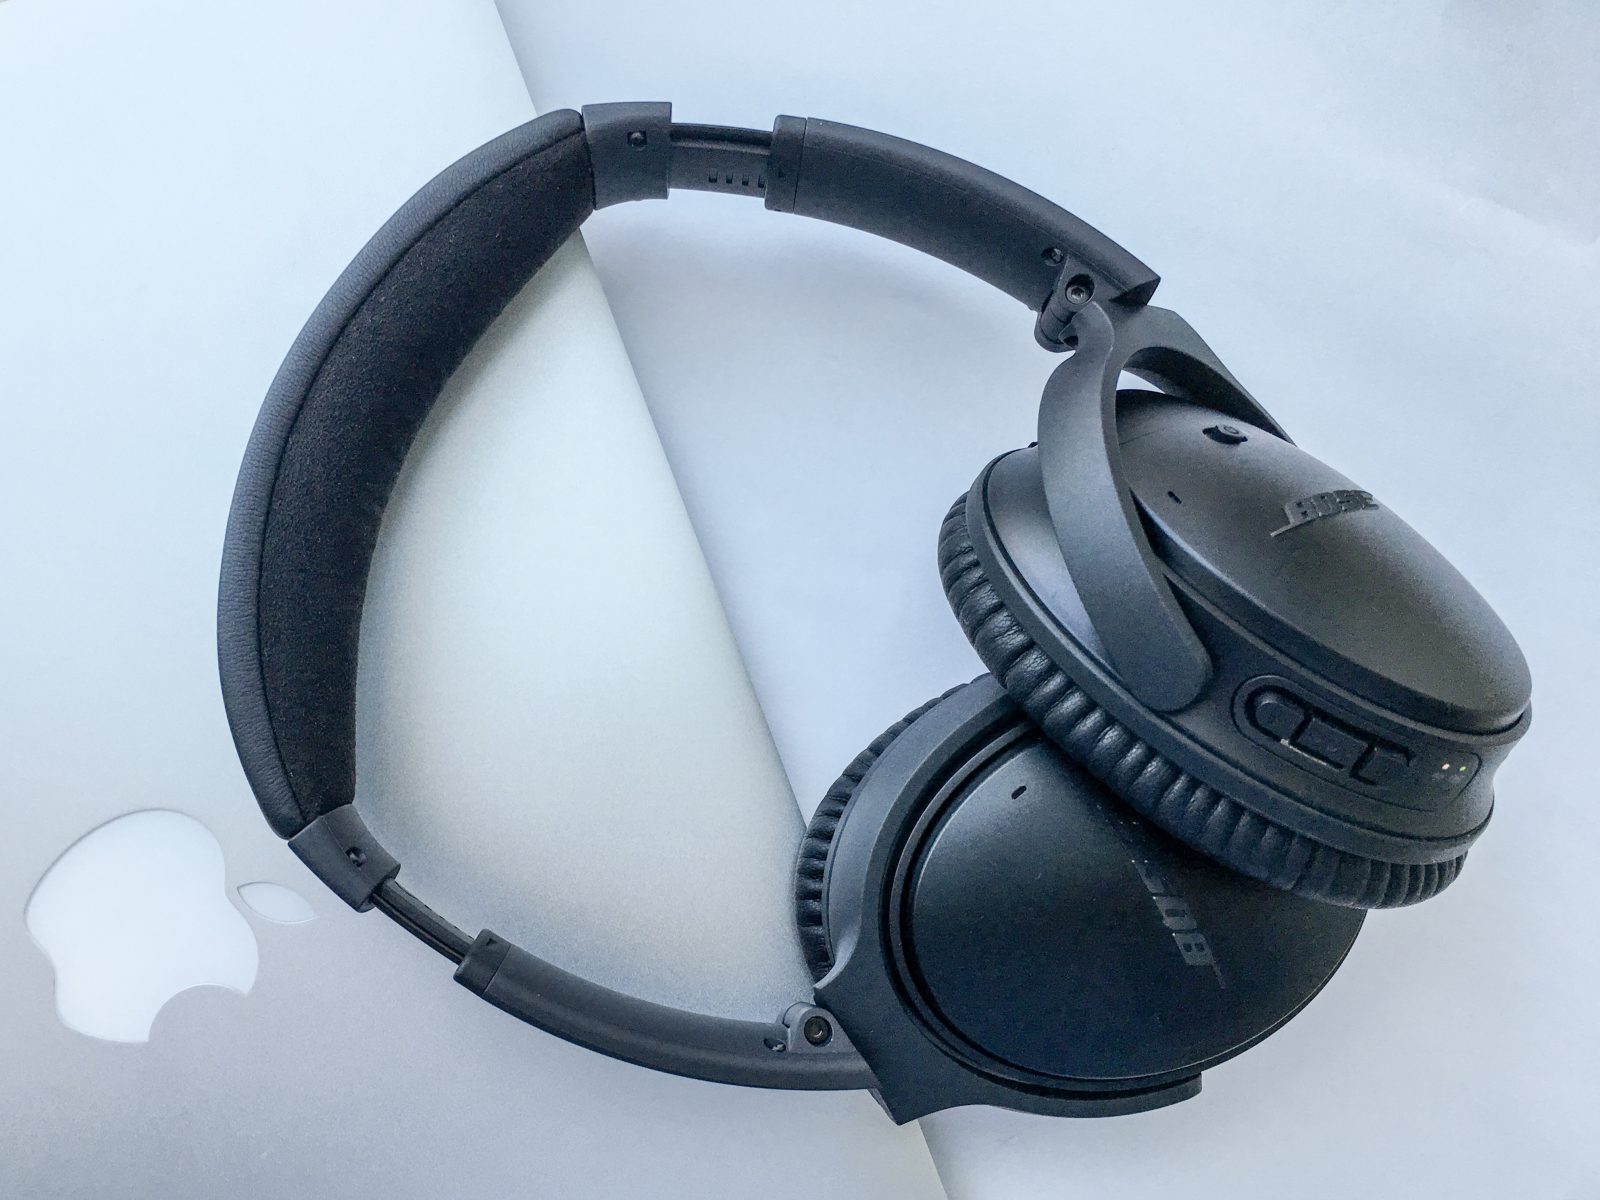 Review: BOSE QuietComfort 35 - The GETTING THINGS DONE Headphone